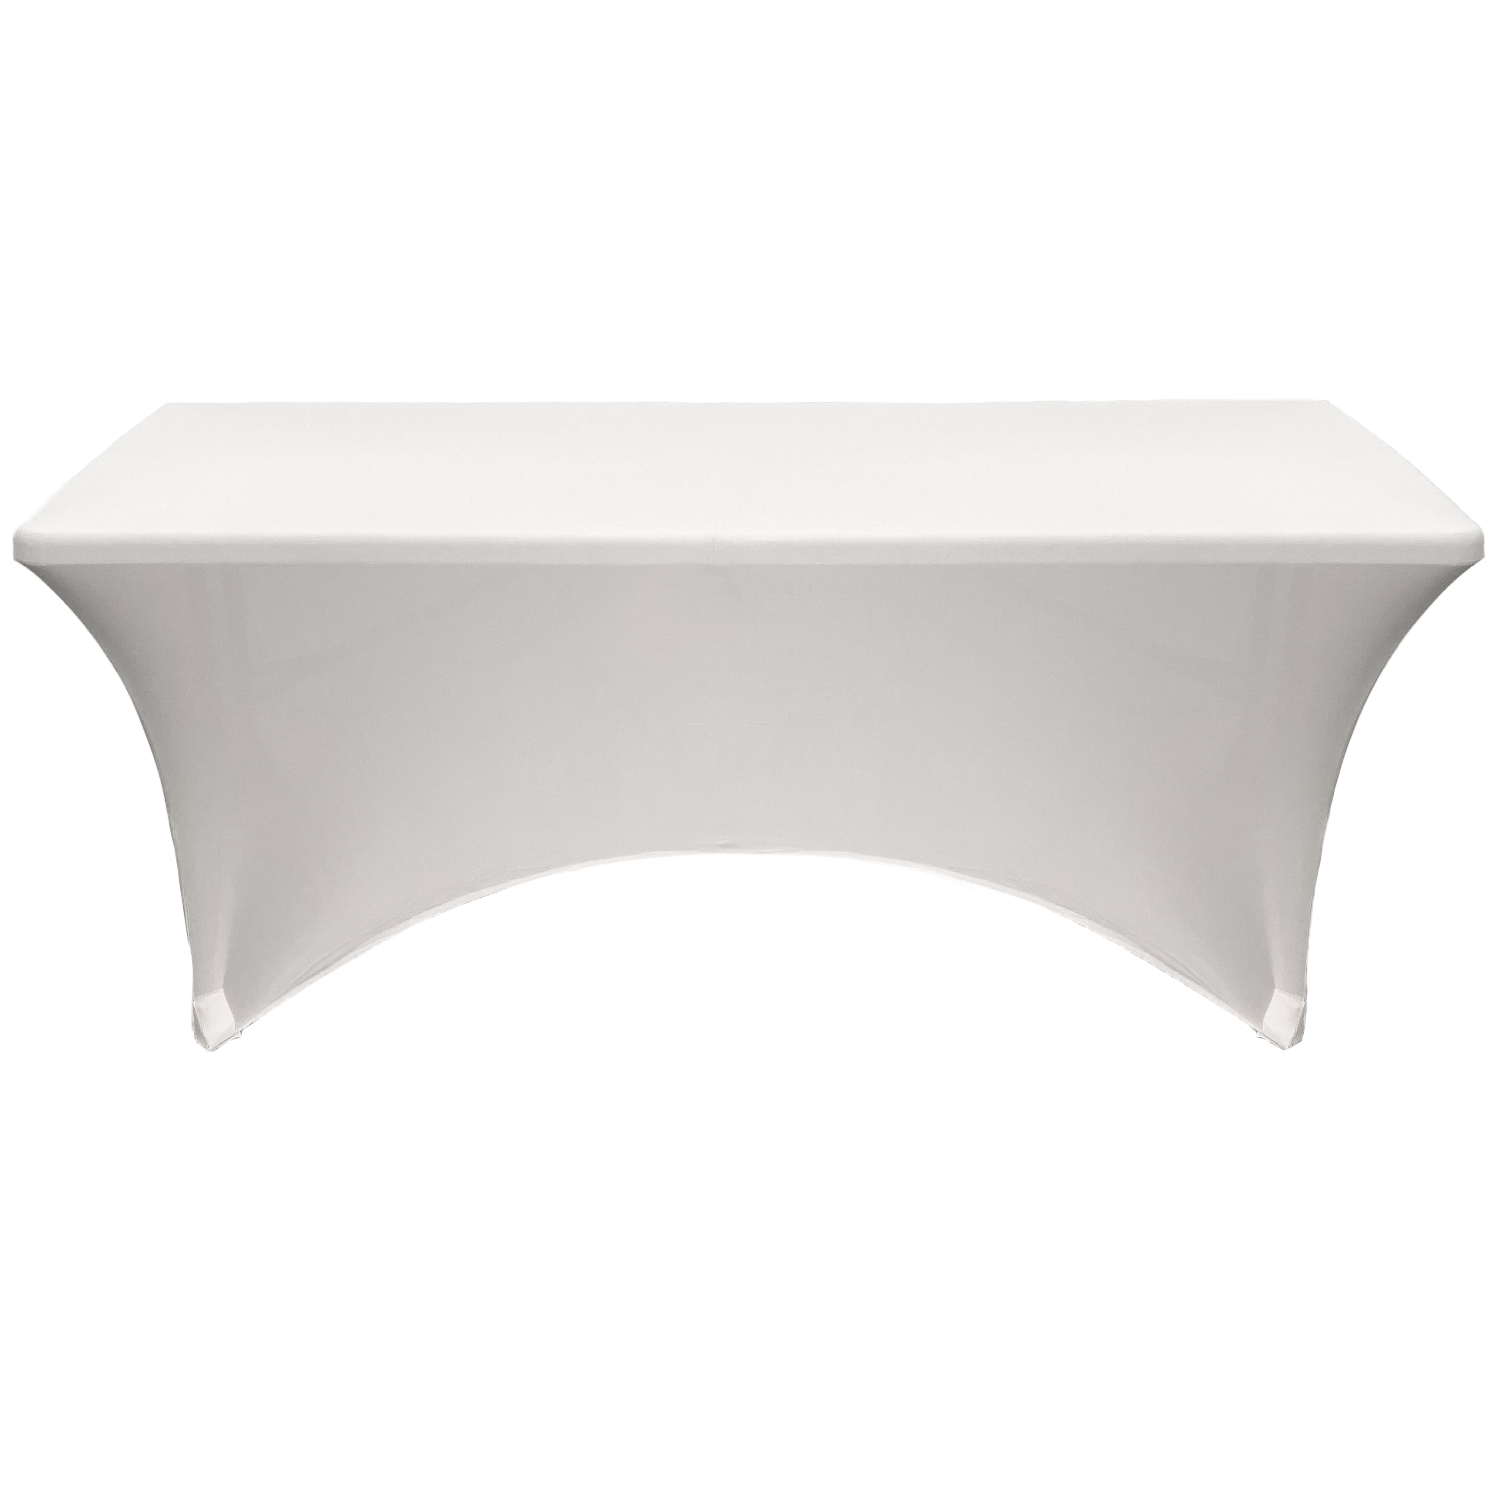 Your Chair Covers - Stretch Spandex 5 ft Rectangular Table Cover White for Wedding, Party, Birthday, Patio, etc. - image 2 of 3